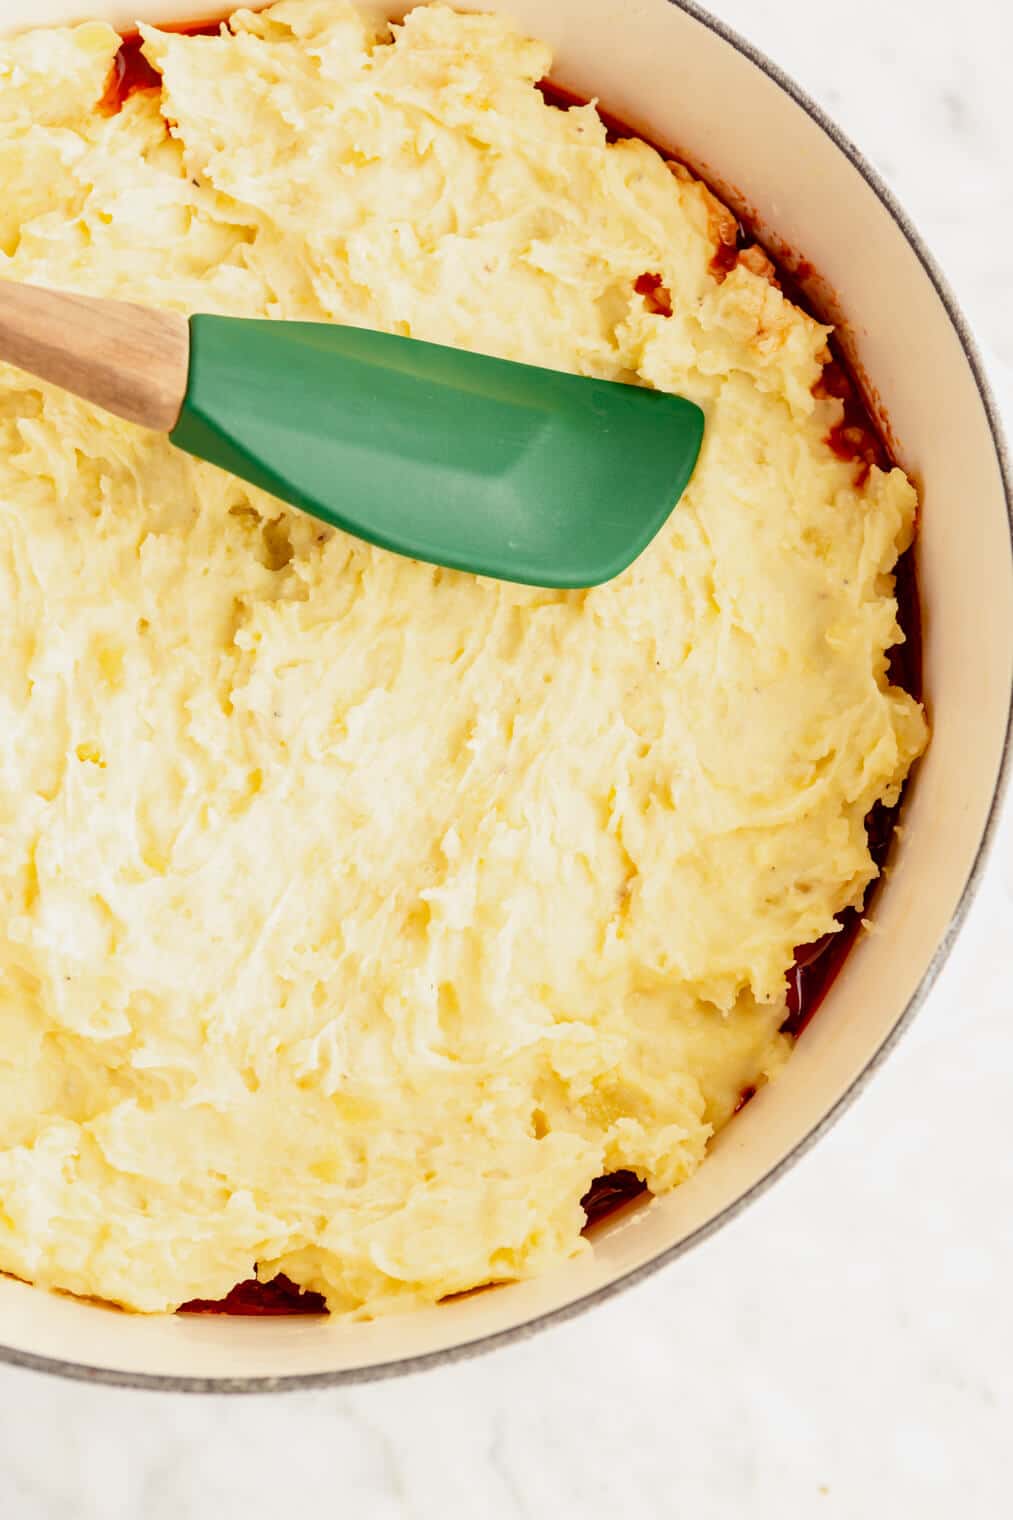 Green spatula spreading out mashed potatoes on top of beef mixture in a round, white casserole dish.